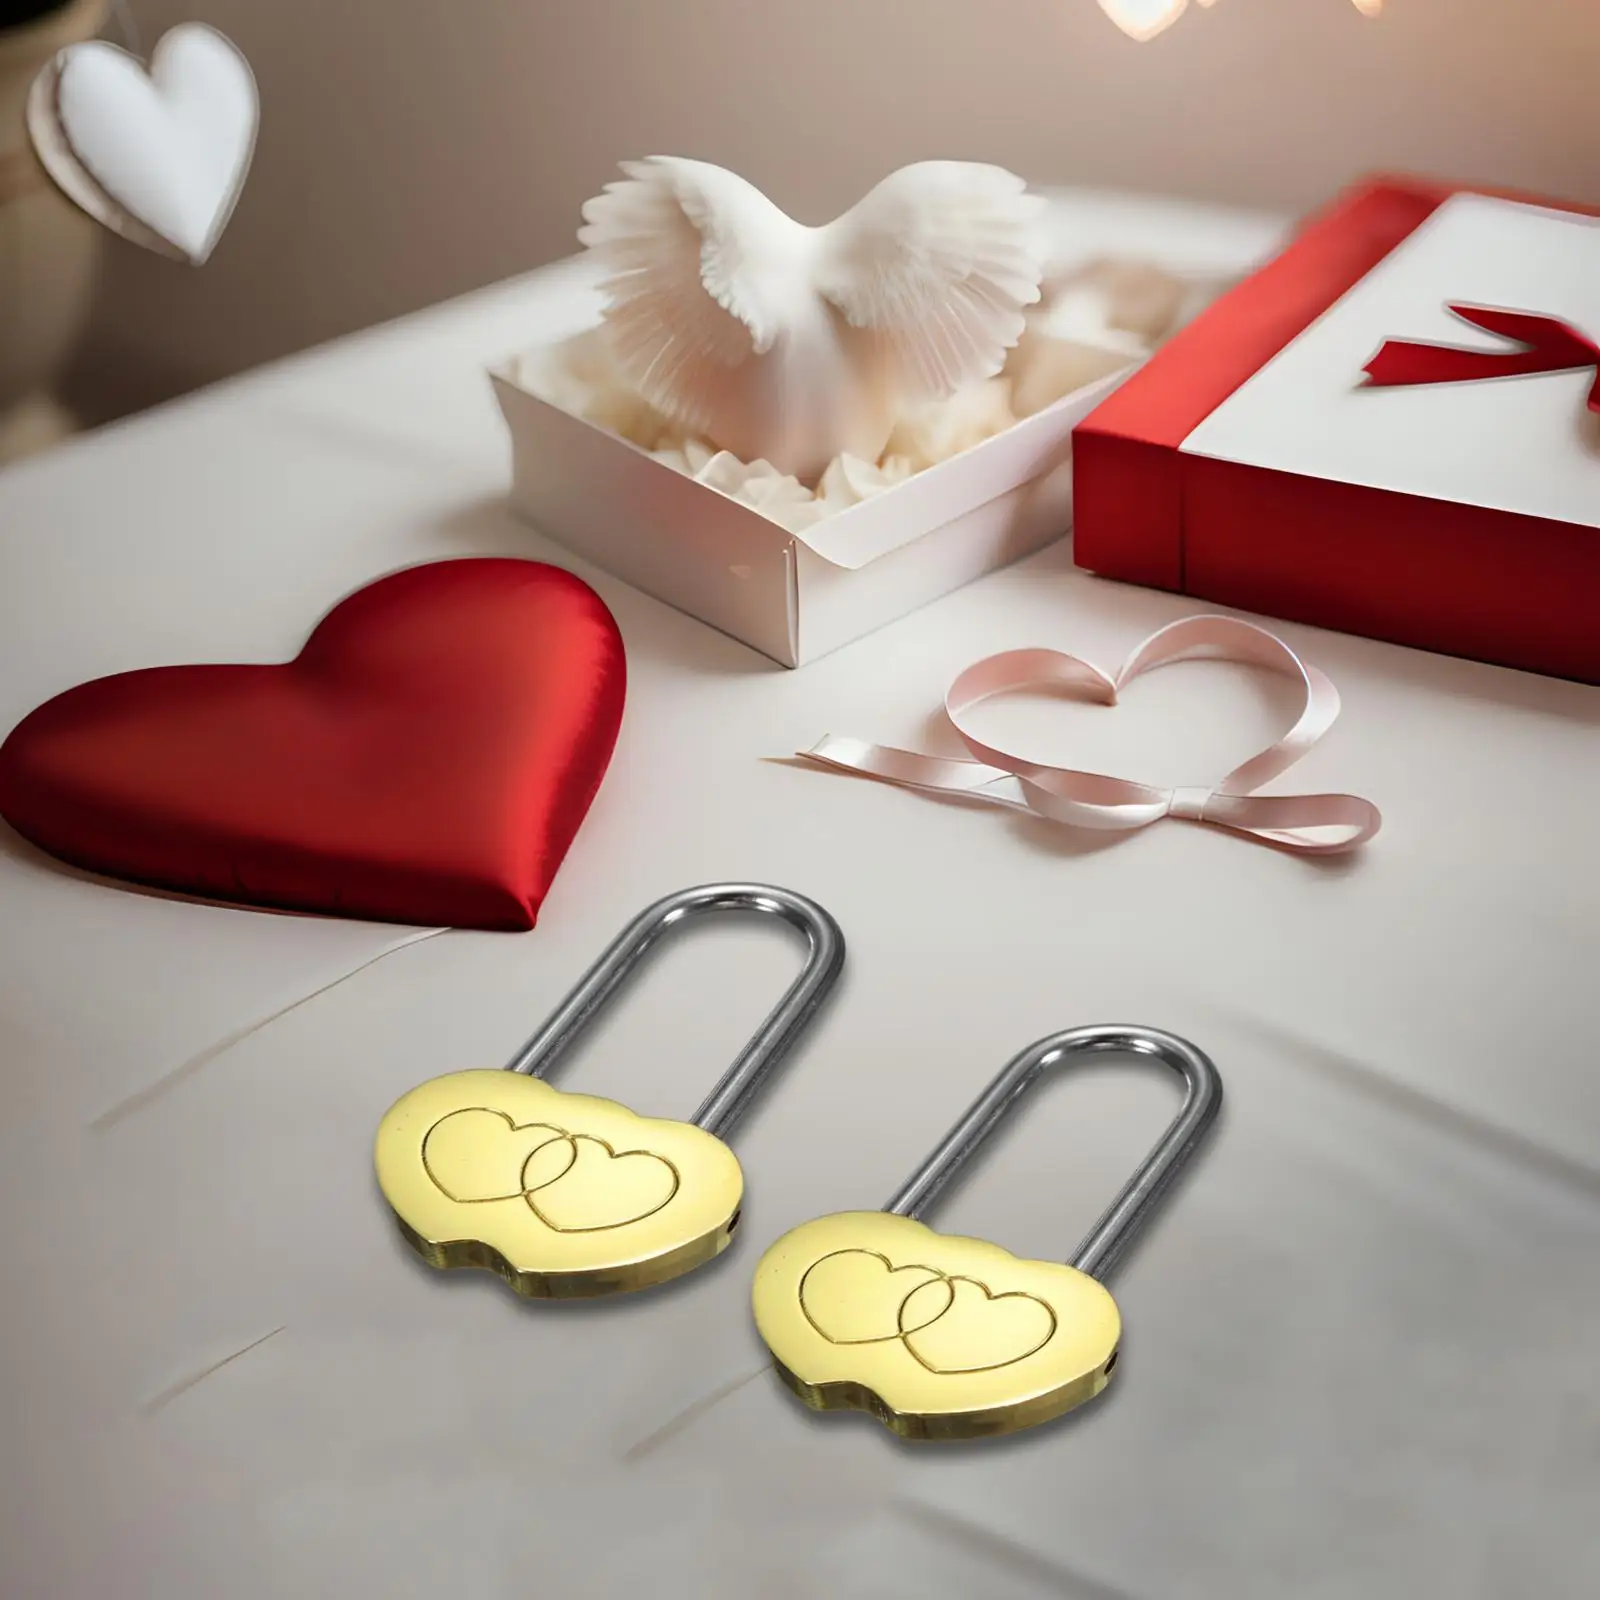 2 Pieces Love Lock without Key Rust Resistant Wish Lock Valentines Gift for Small Luggage Wedding Diary Book Jewelry Box Lovers